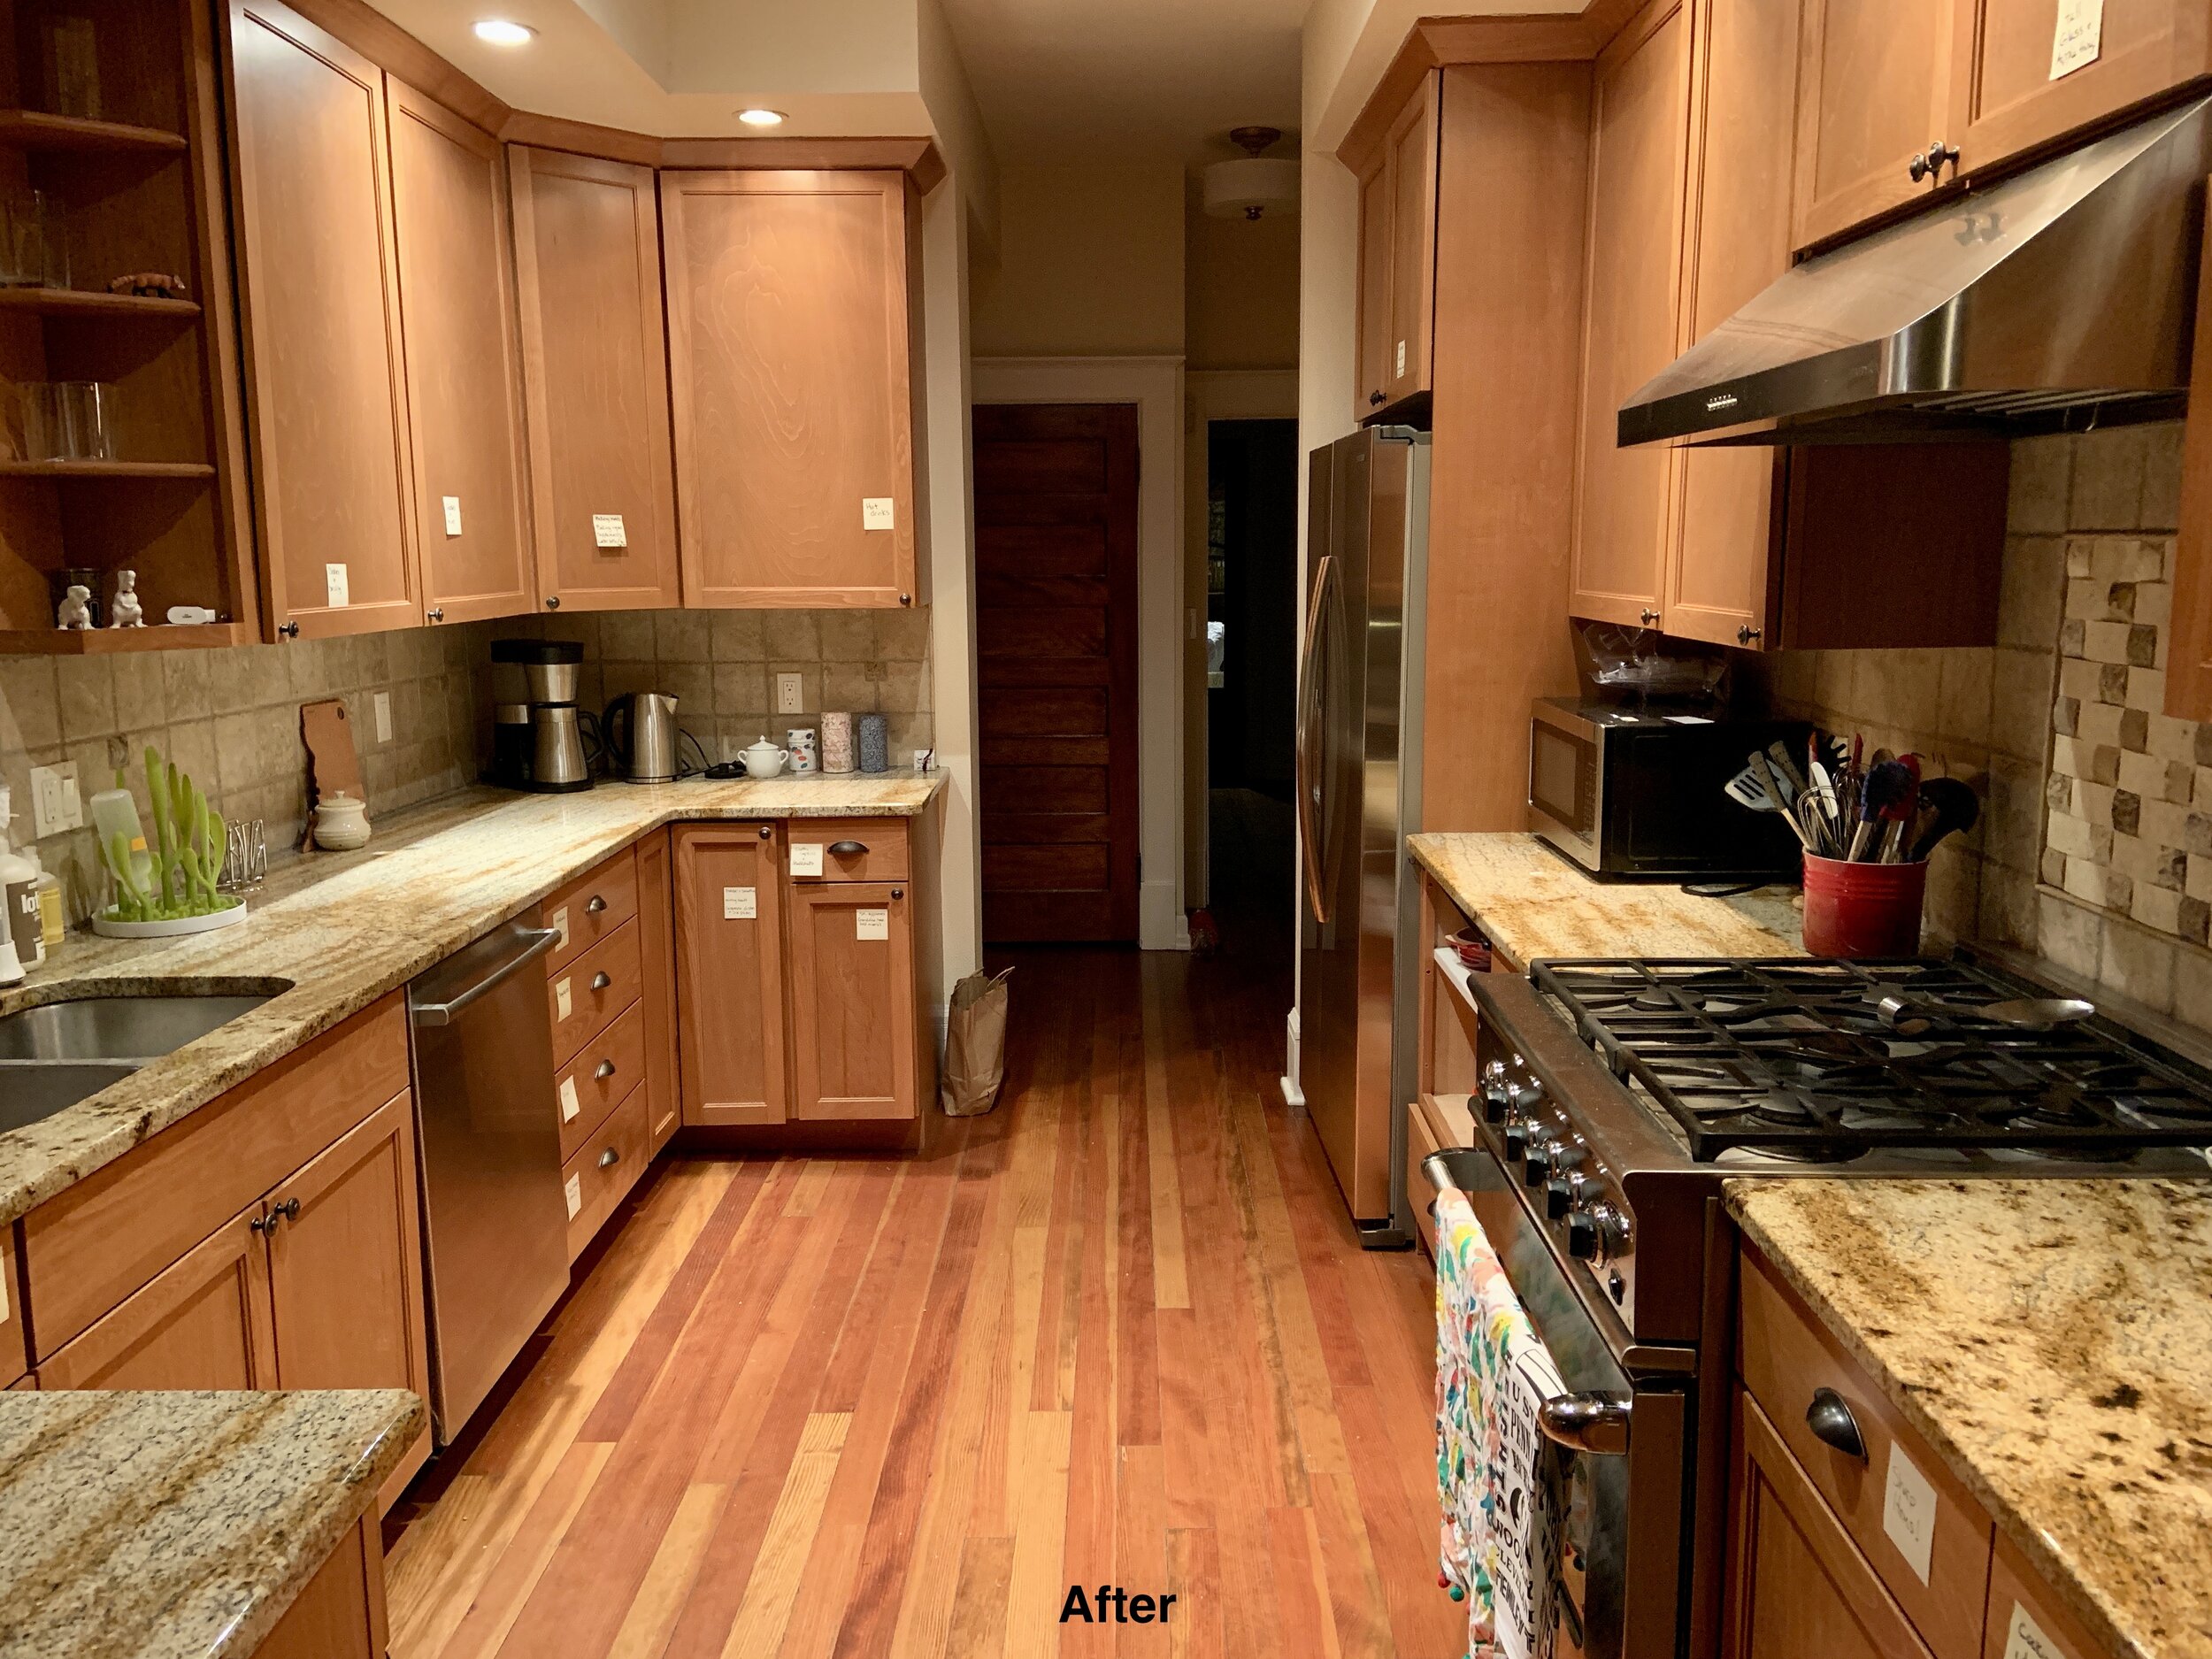 After photo of wooden floor and wood cabinet kitchen compeltely clean with post it notes labeled on every cabinet. Counter clean.